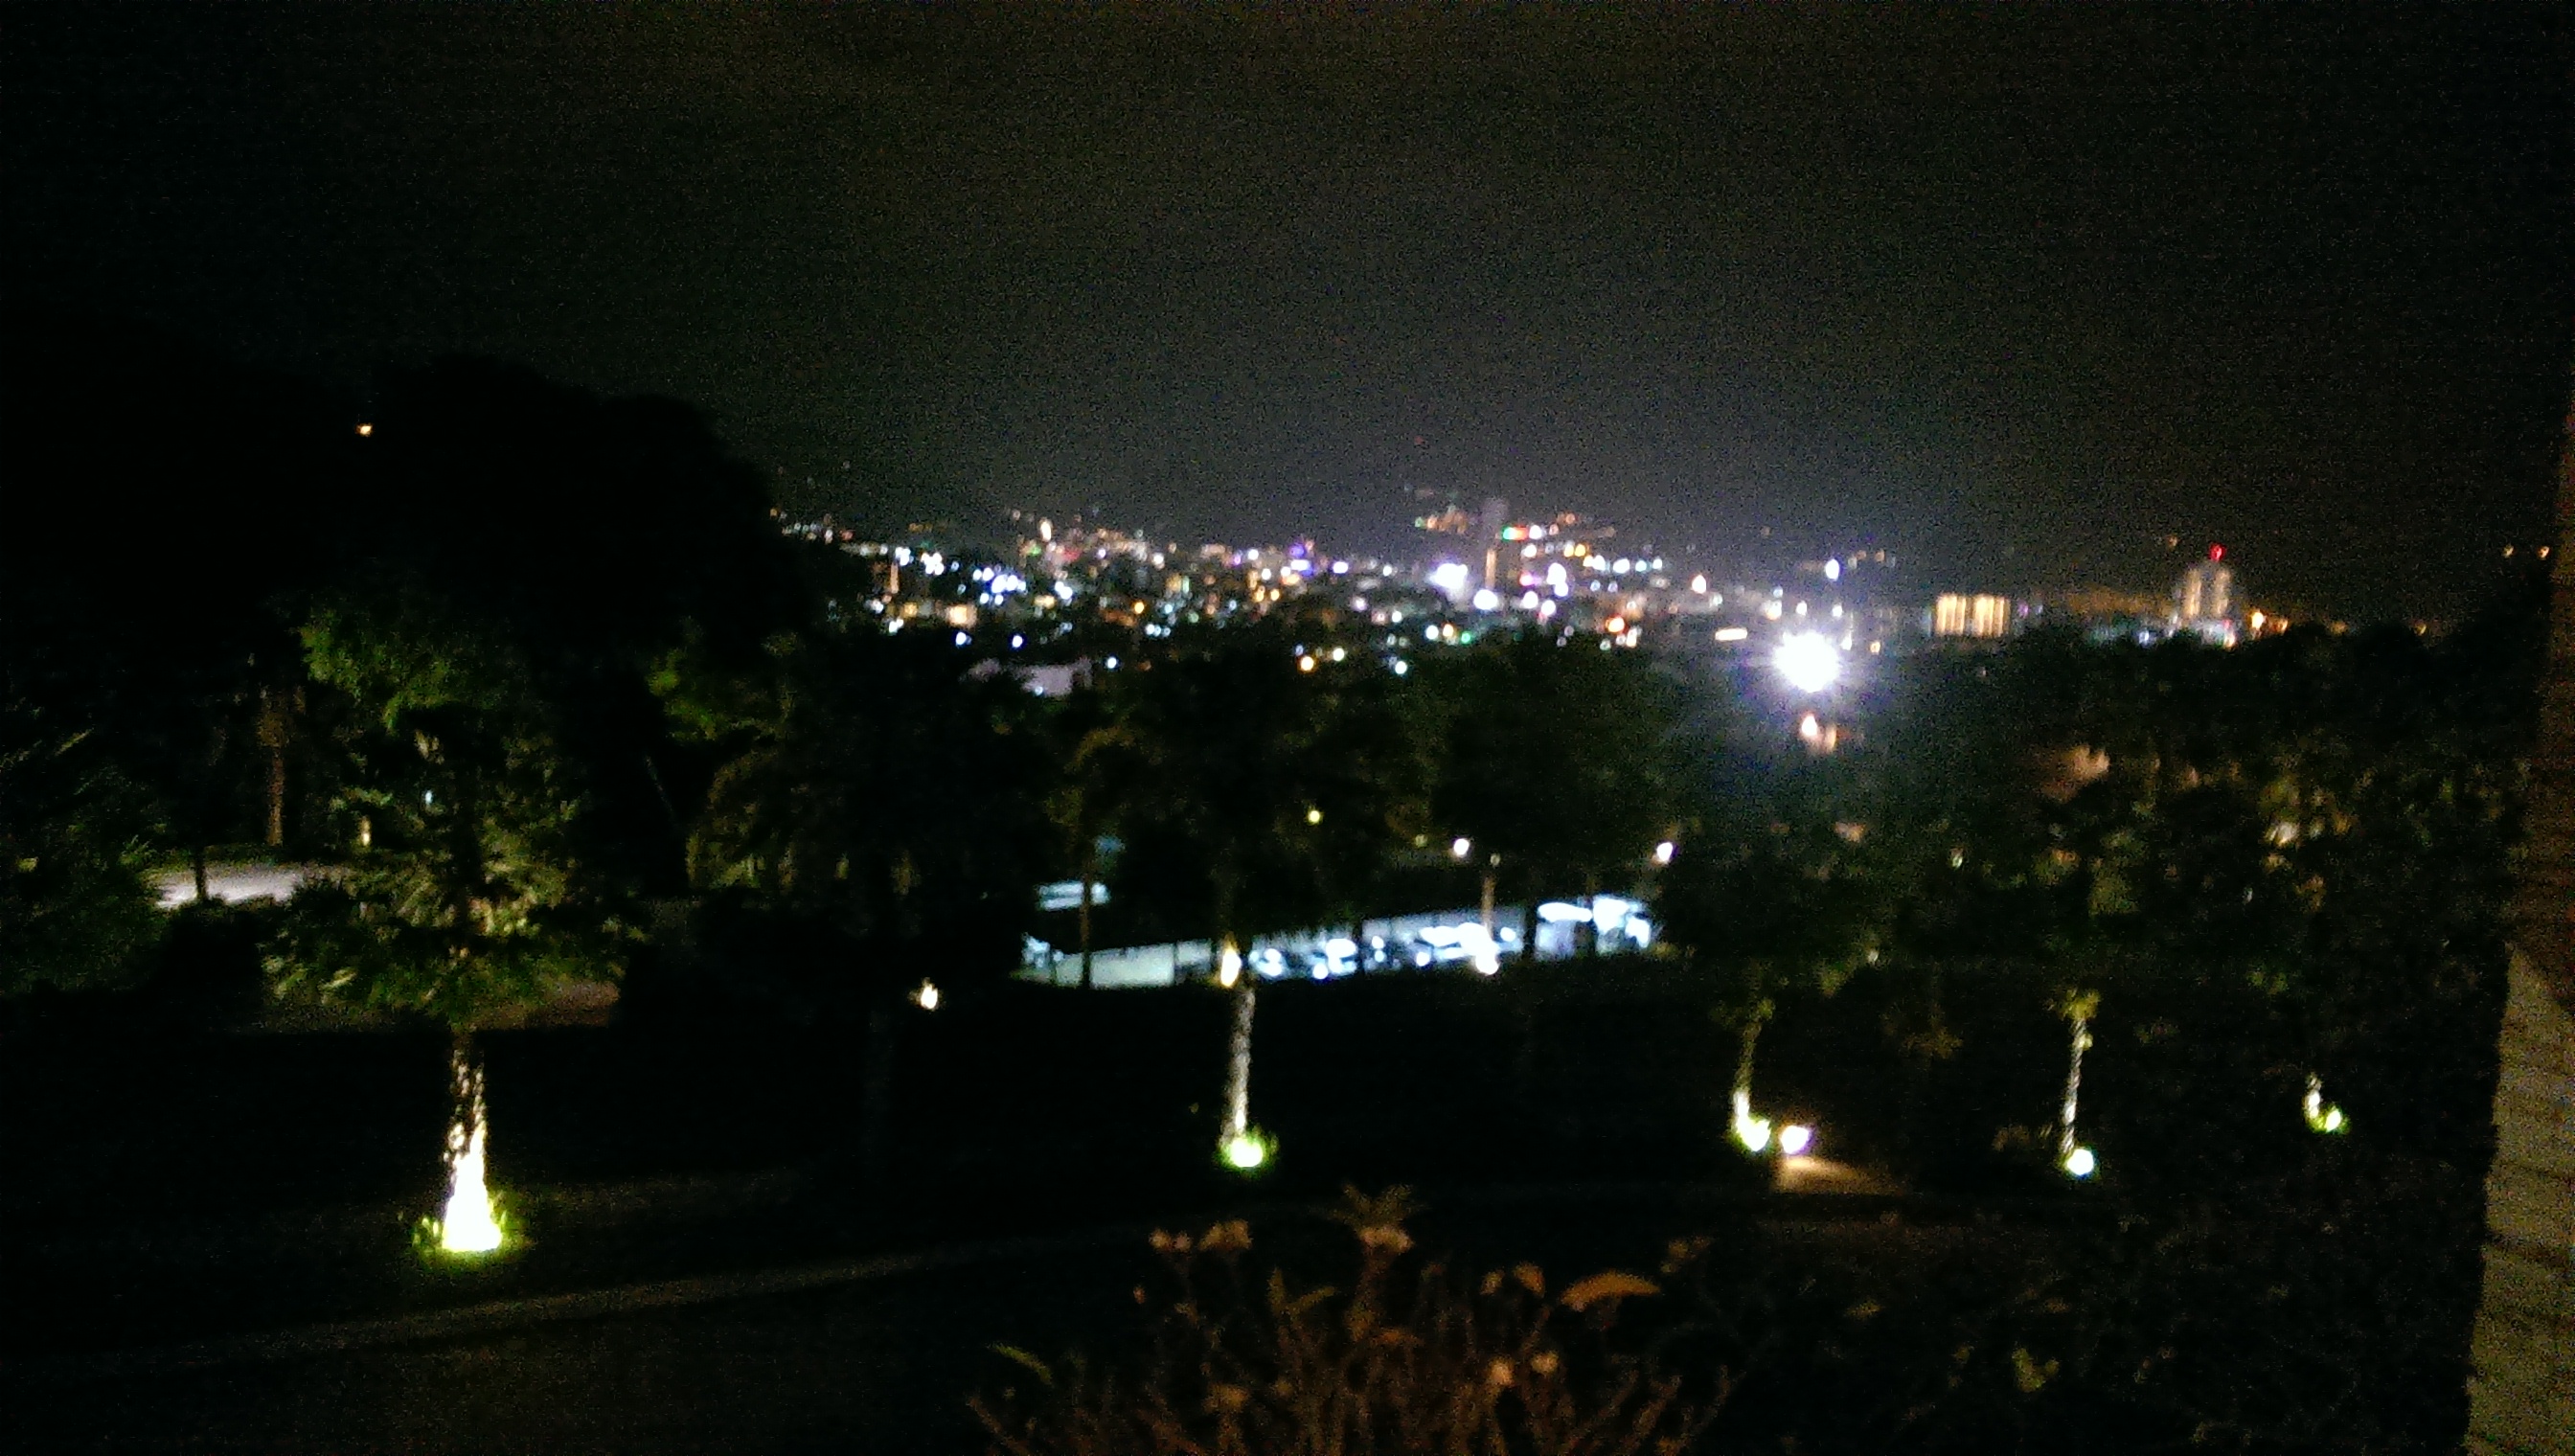 The view was also beautiful at night.  Patong town is in the distance and there were often fireworks to enjoy